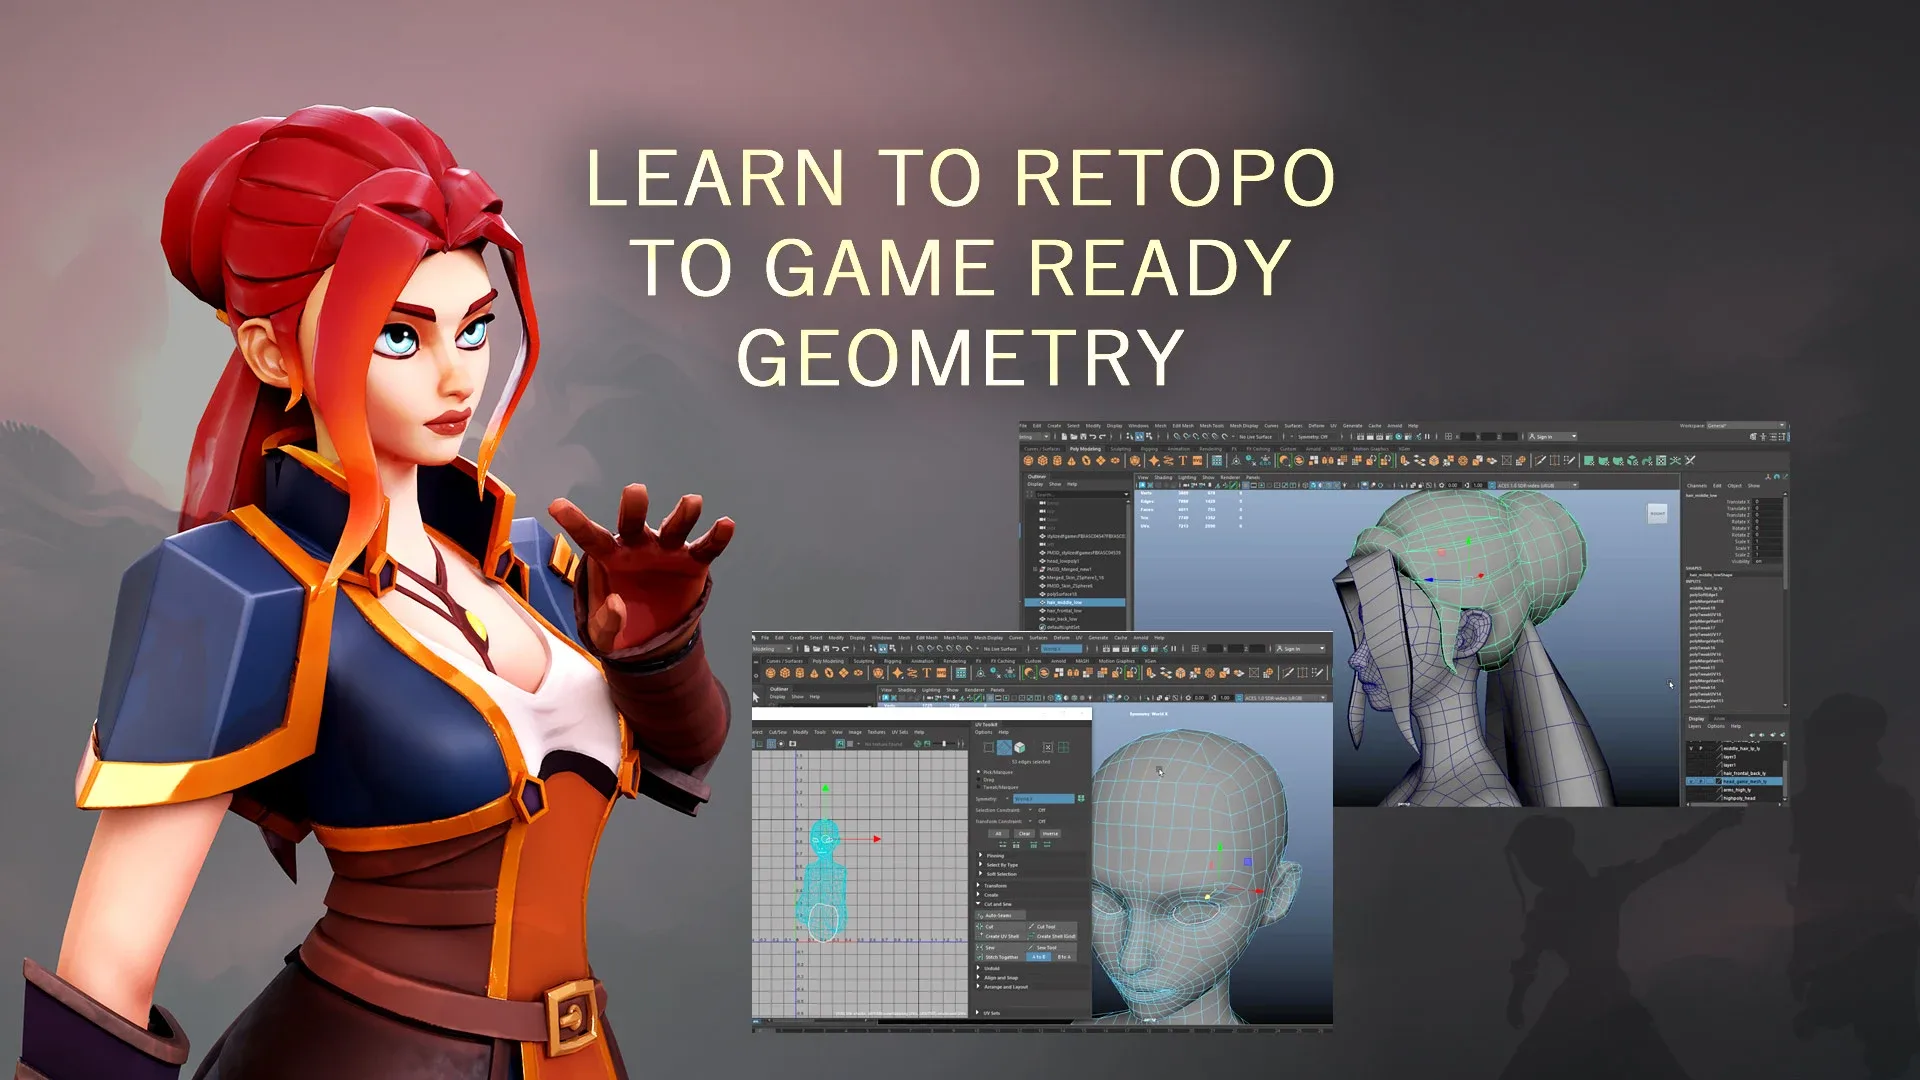 Ultimate Stylized Character Creation Course